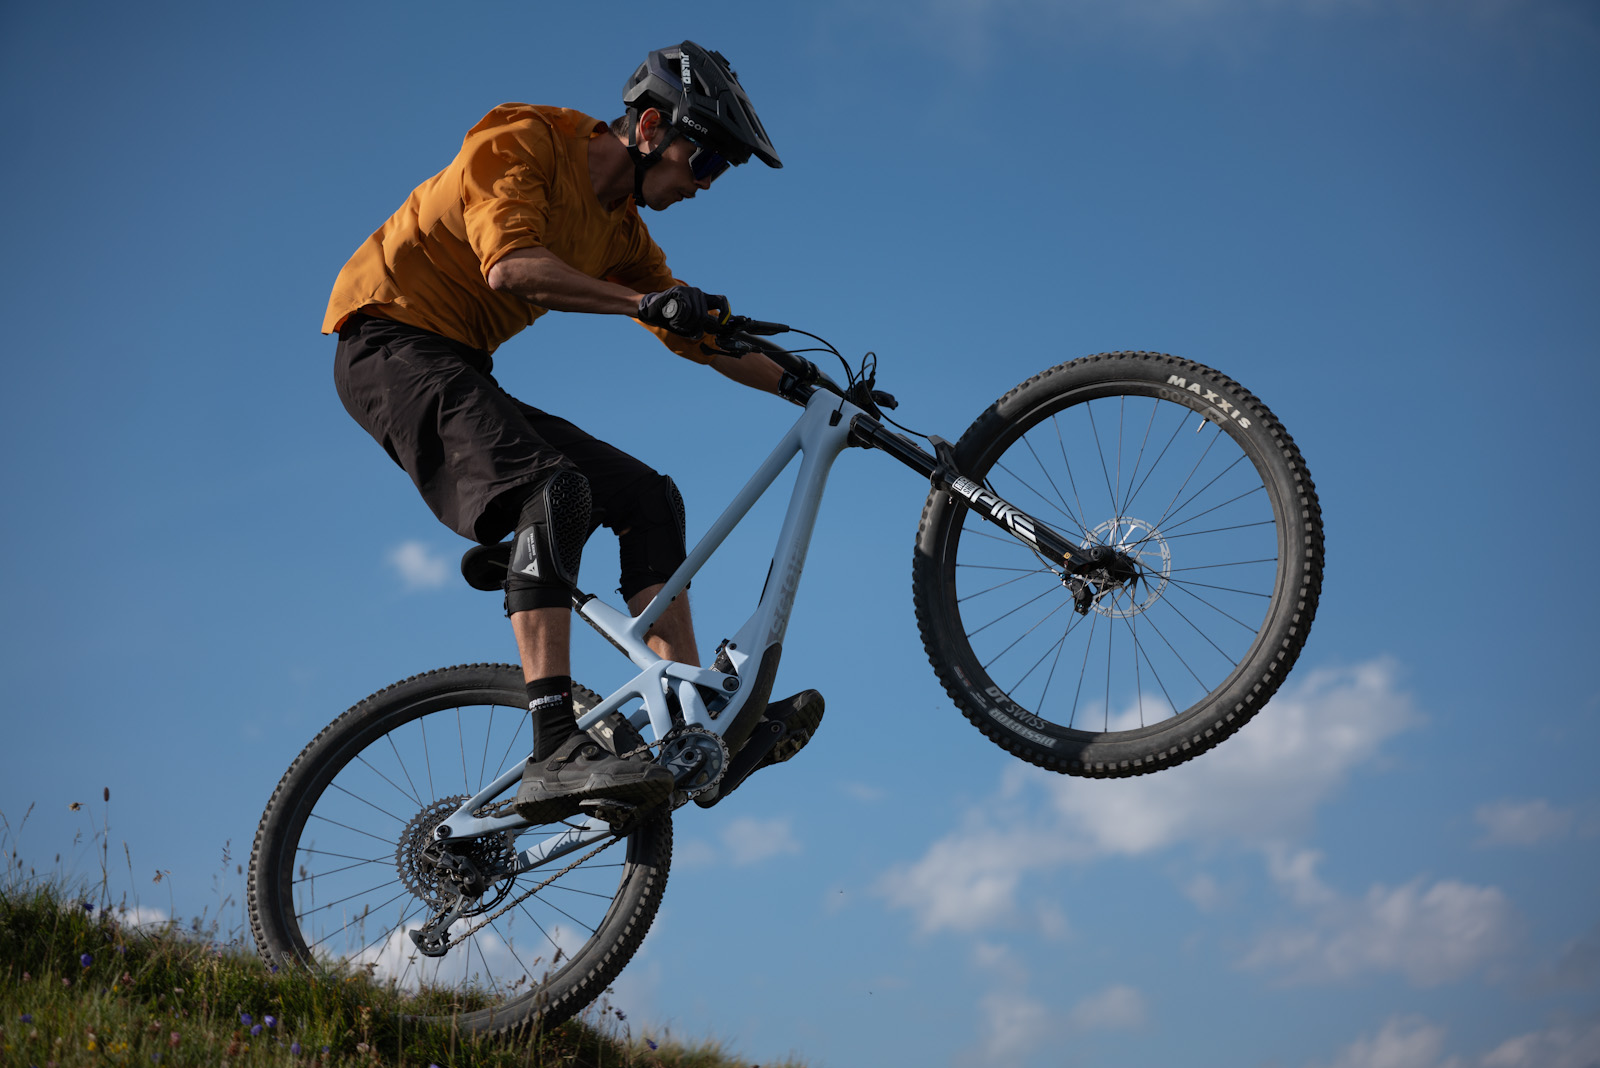 SCOR Goes Short On Travel, Big On Fun With The New 2030 Trail Bike